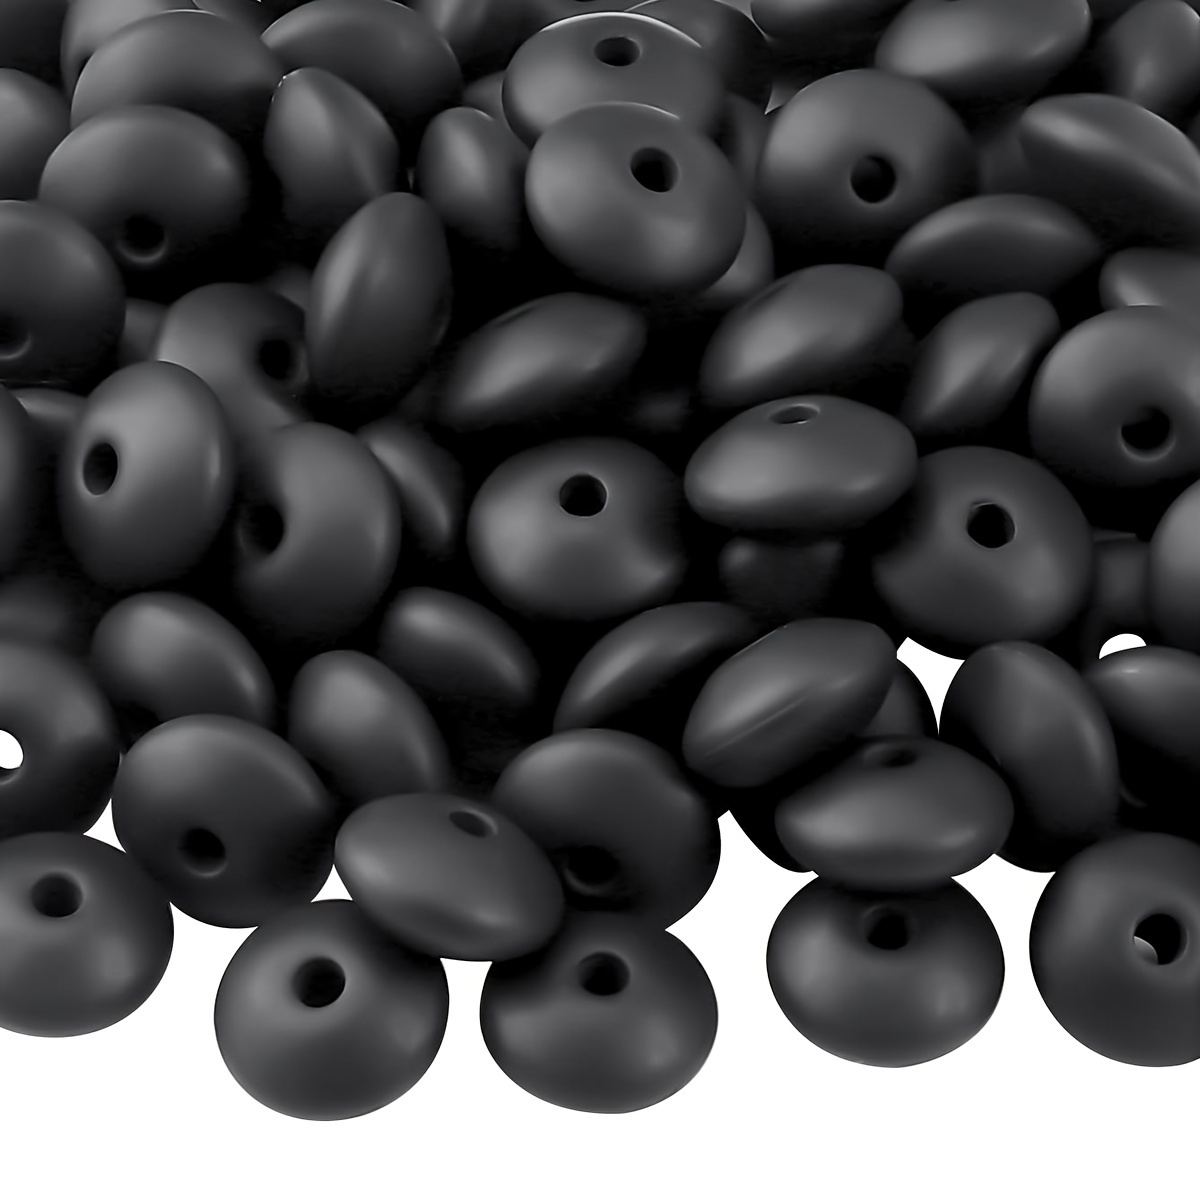 

50/100pcs 12mm Silicone Lentil Focal Beads For Jewelry Making Diy Creative Key Bag Chain Bracelet Necklace Handmade Craft Supplies